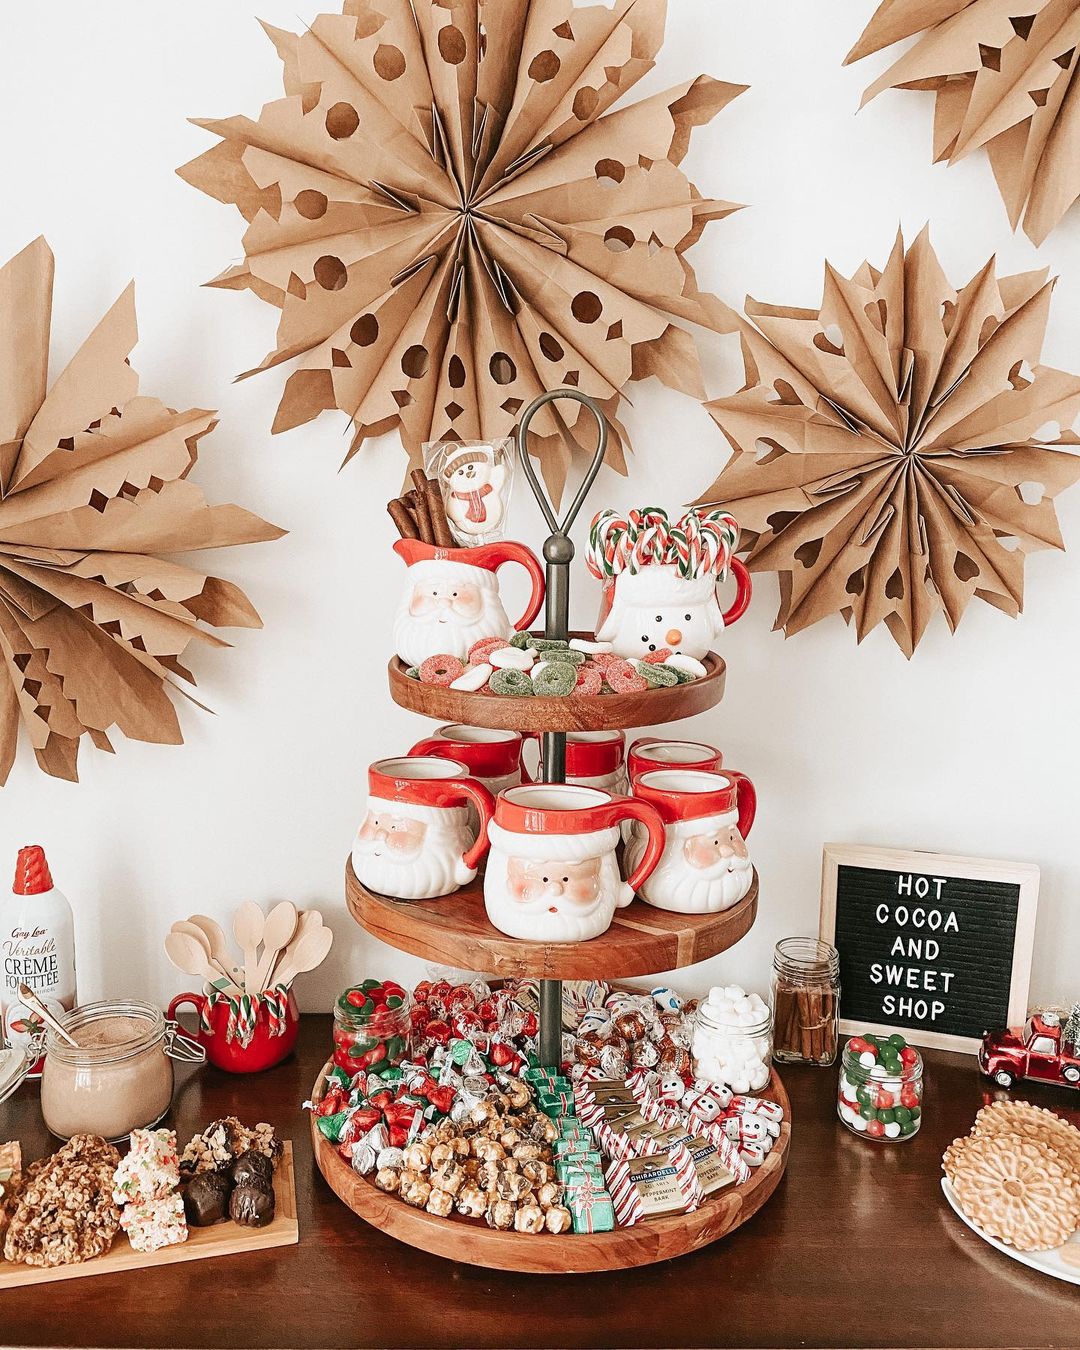 Holiday Drink Station with Santa Mugs and Candy. Photo by Instagram user @shandasilva